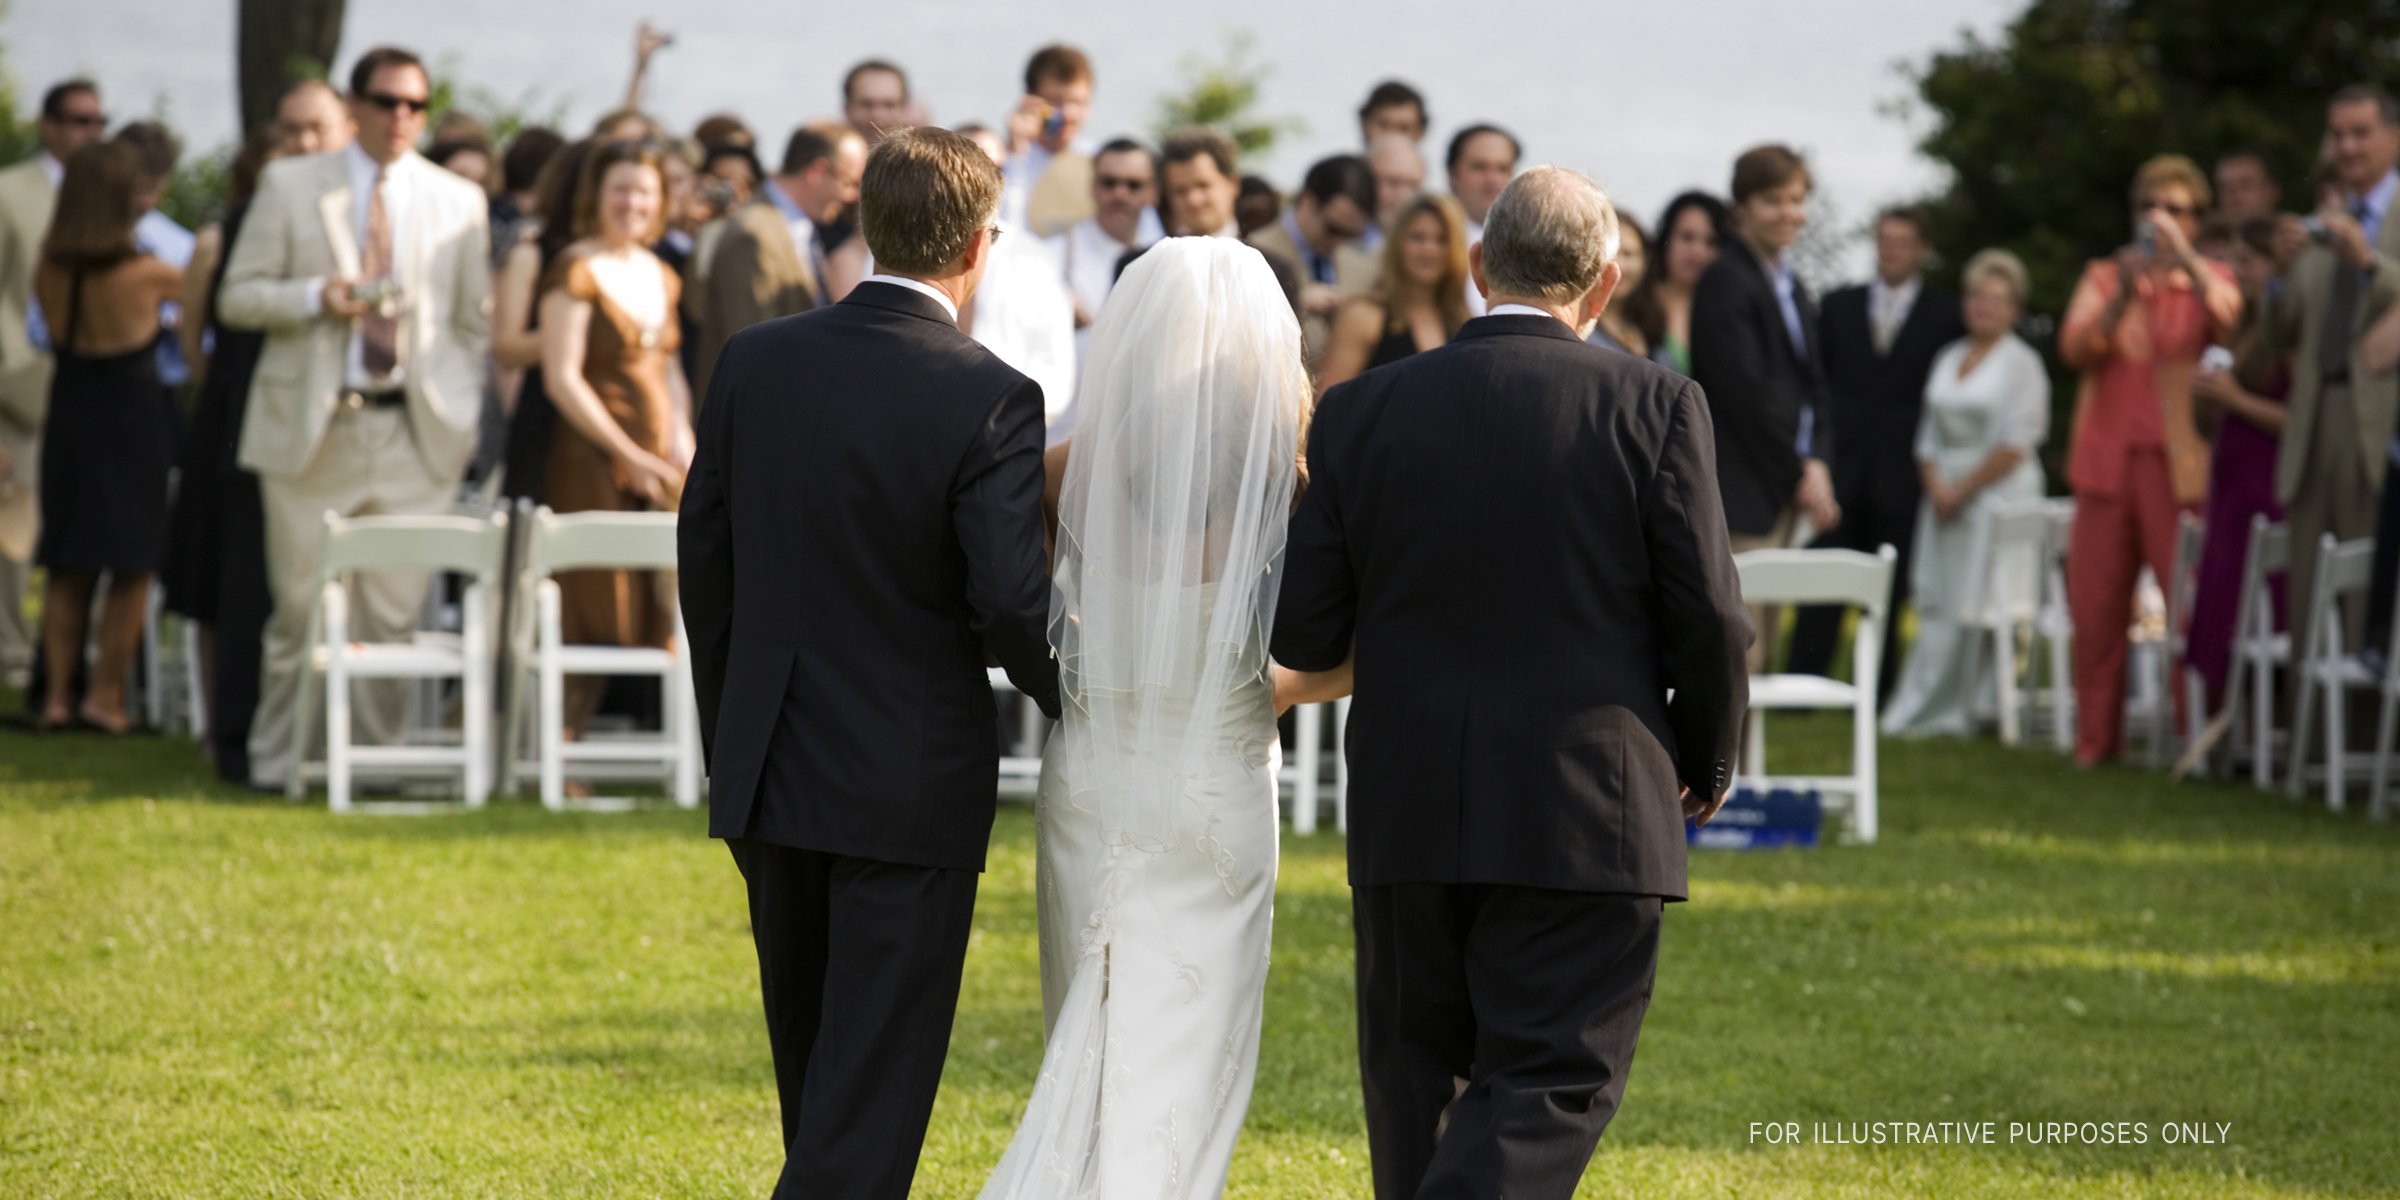 Bride walking down the aisle with two men | Source: Getty Images